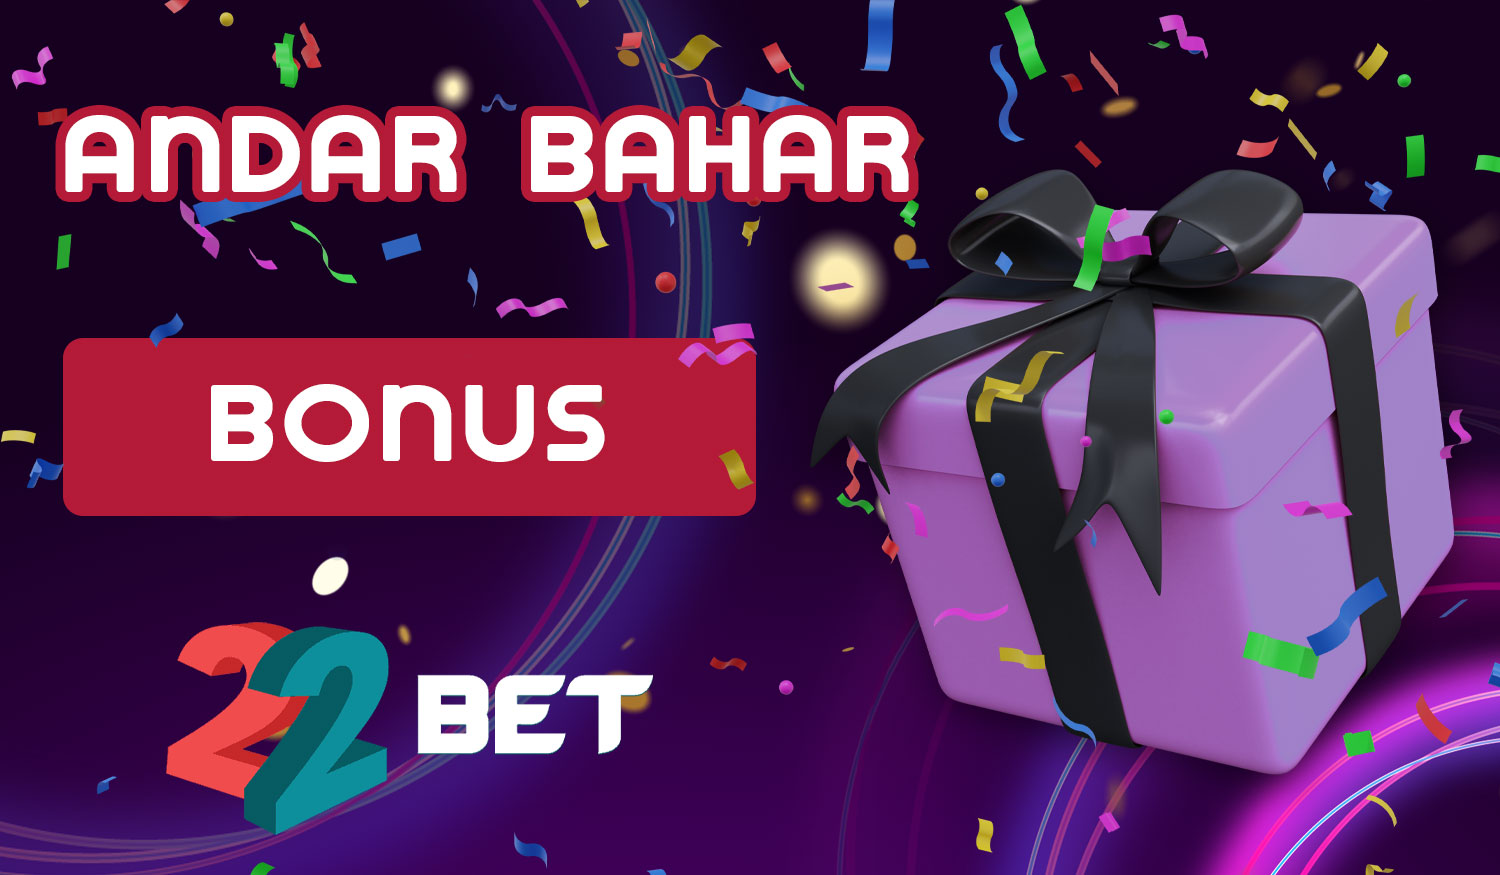 The online casino 22Bet offers a wide range of bonuses for Indian fans of the game Andar Bahar